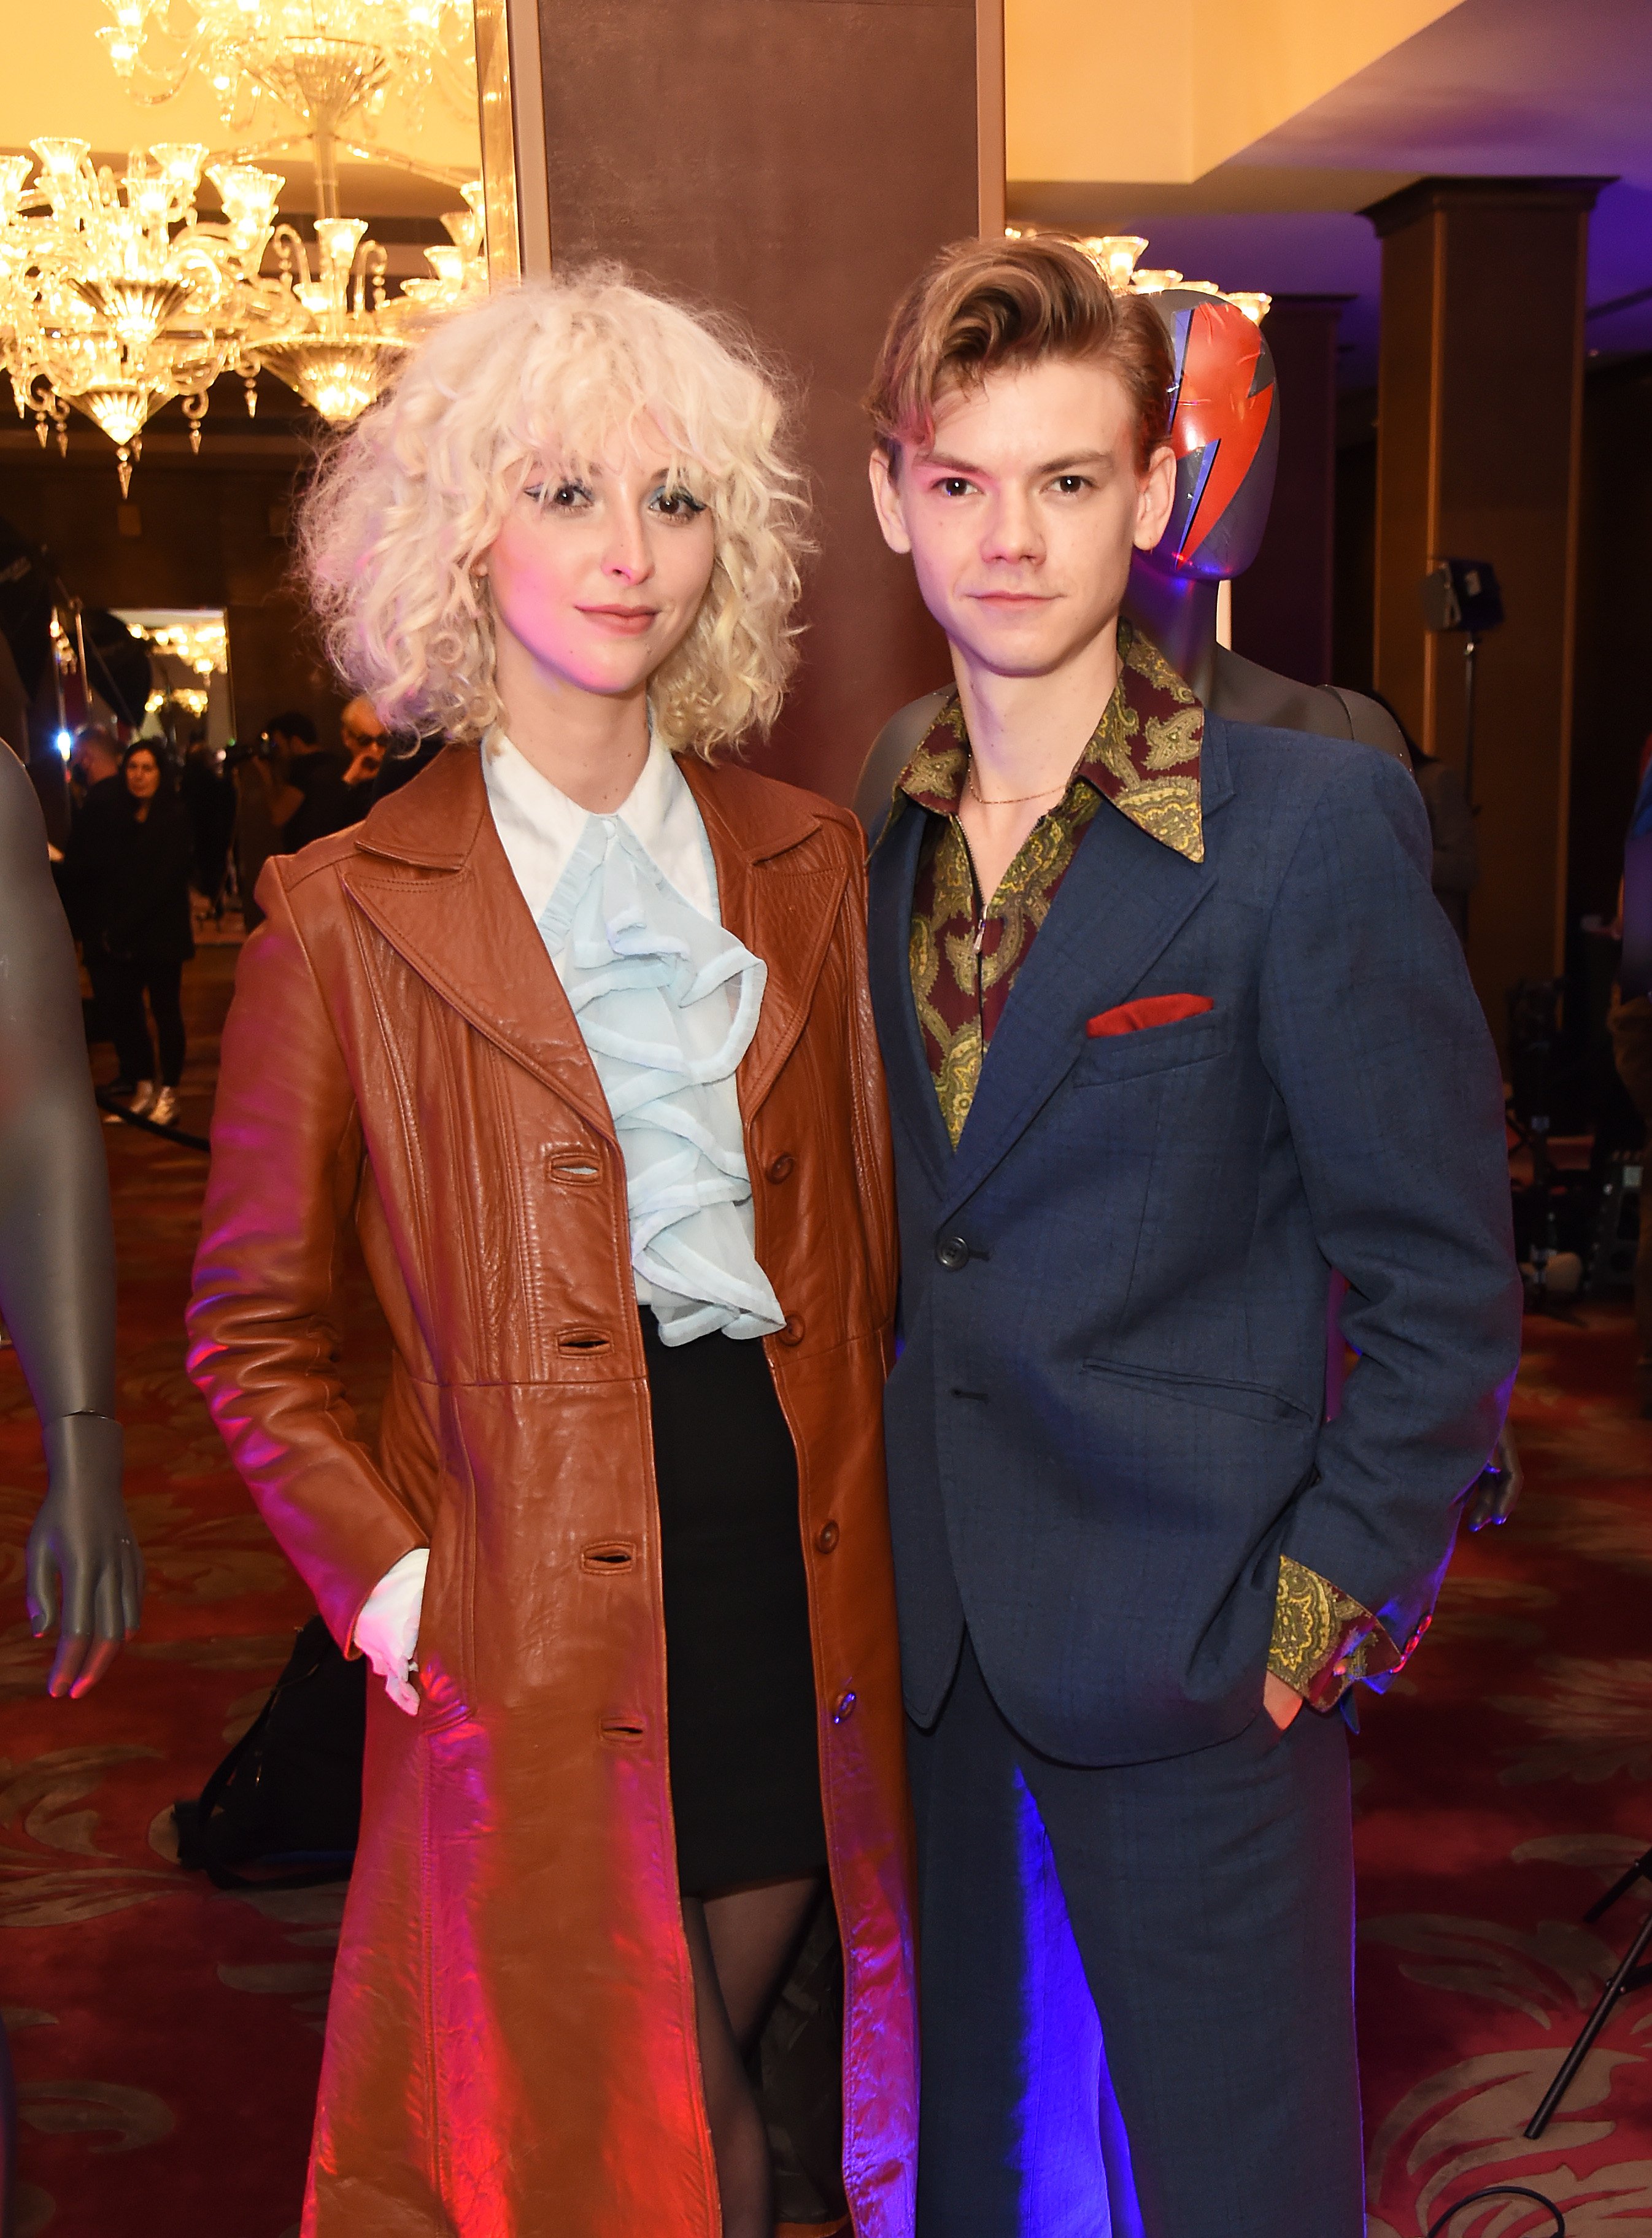 Gzi Wisdom and Thomas Brodie-Sangster at the UK Premiere  "Stardust" on October 28, 2020, in London, England. | Source: Getty Images